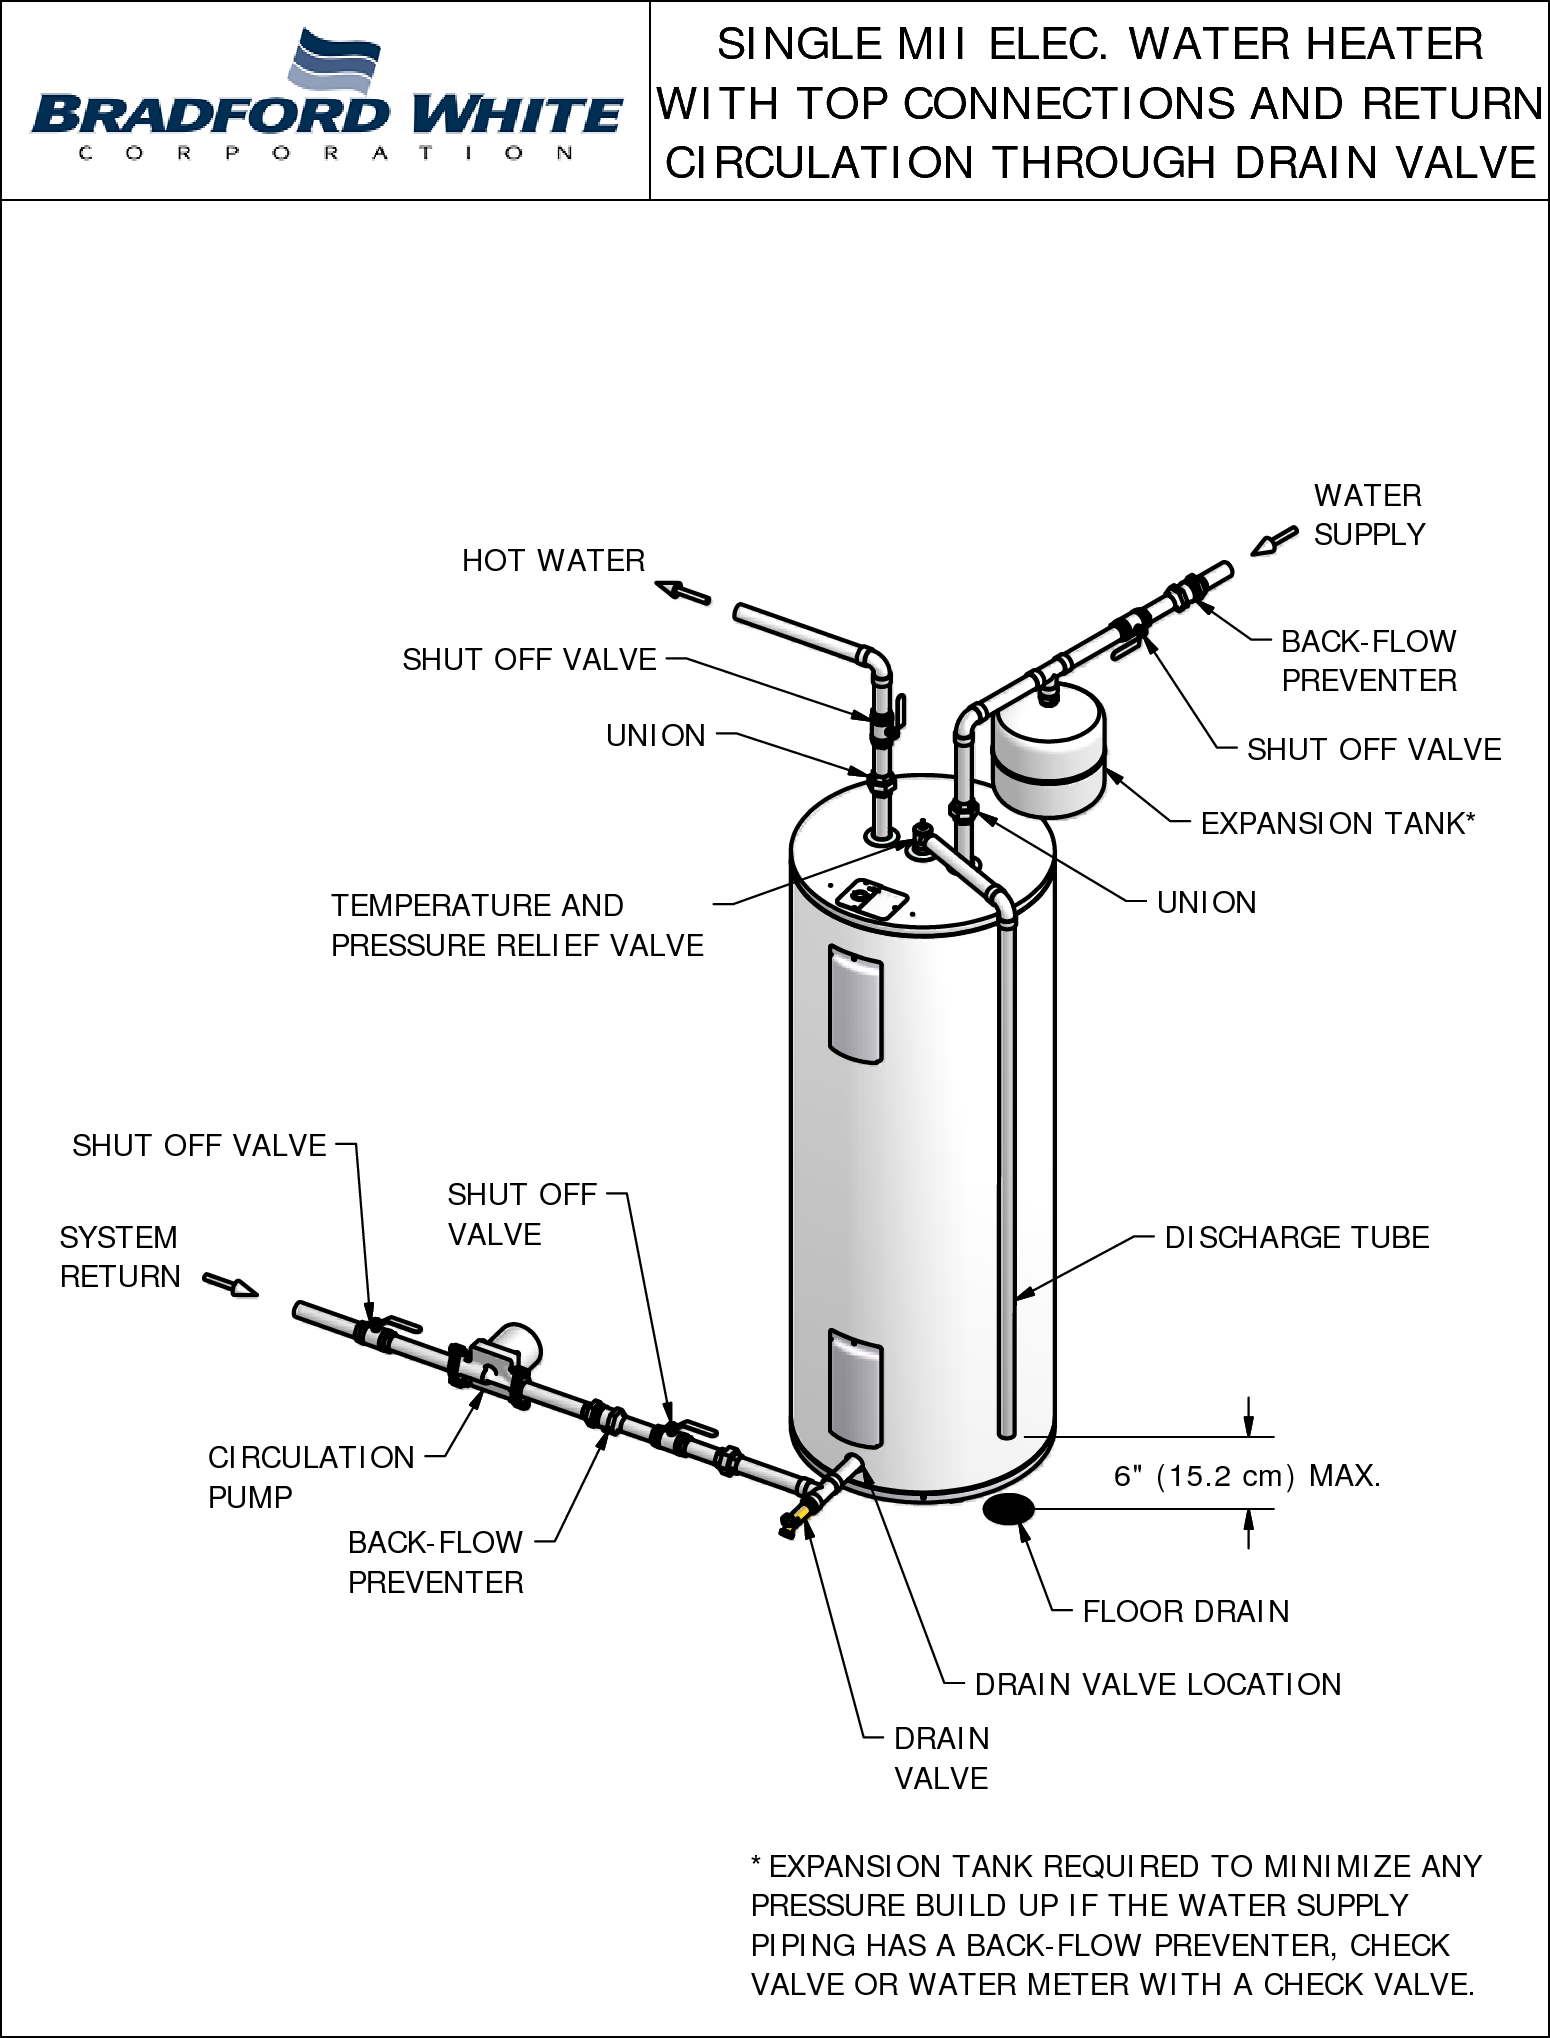 DIAGRAM Indirect Water Heater Piping Diagram MYDIAGRAM ONLINE